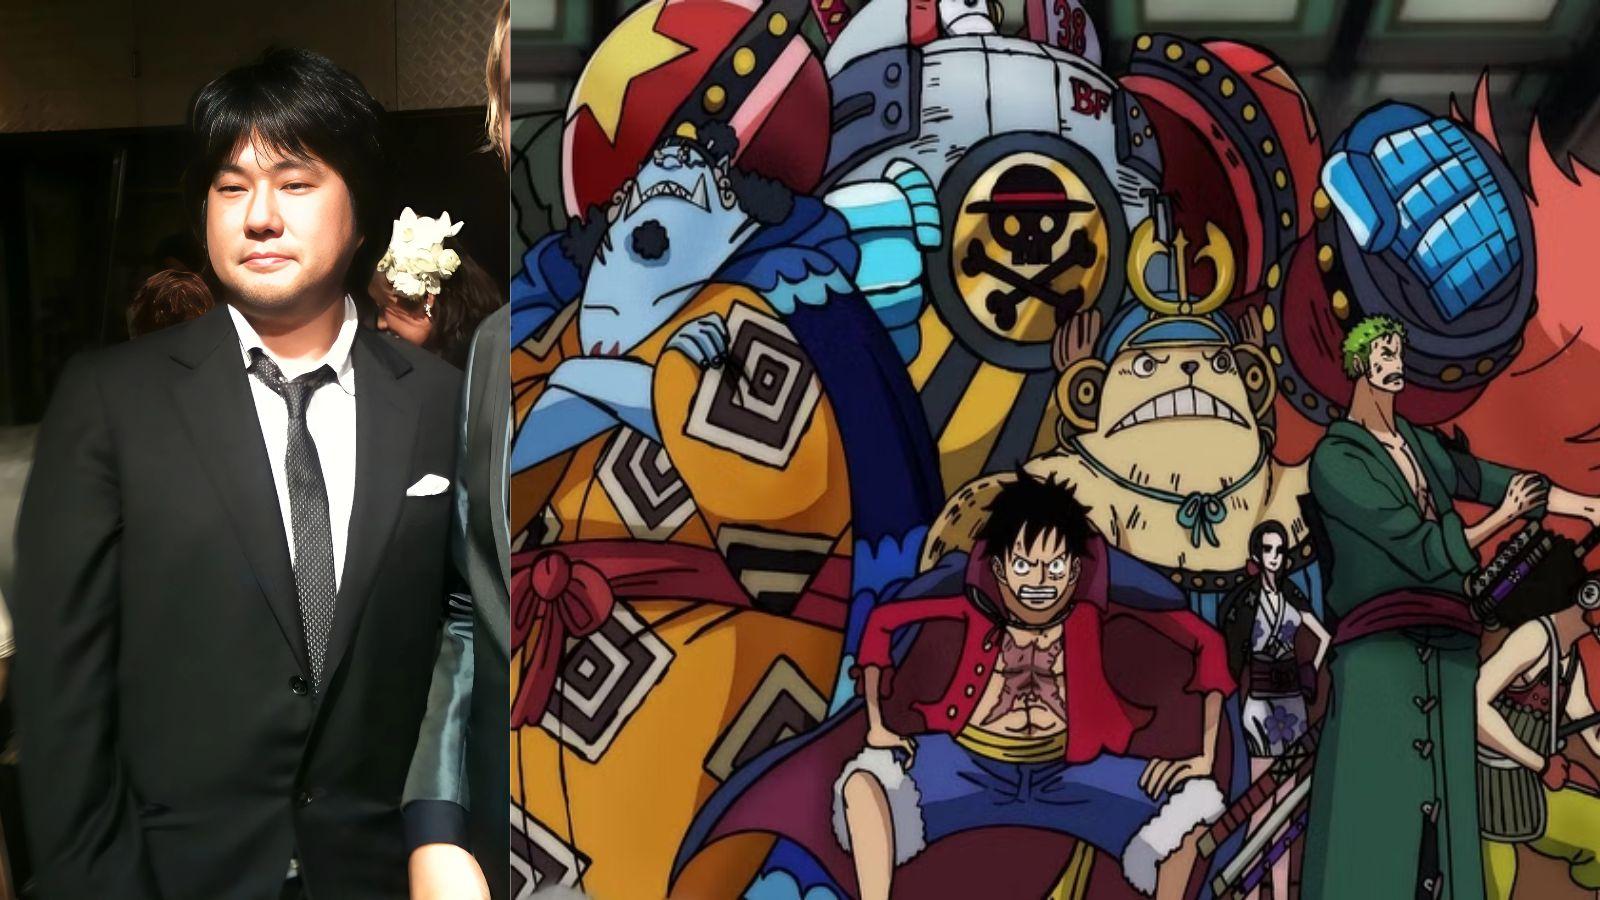 One Piece chapter 1092 spoilers: A major hint about Void Century